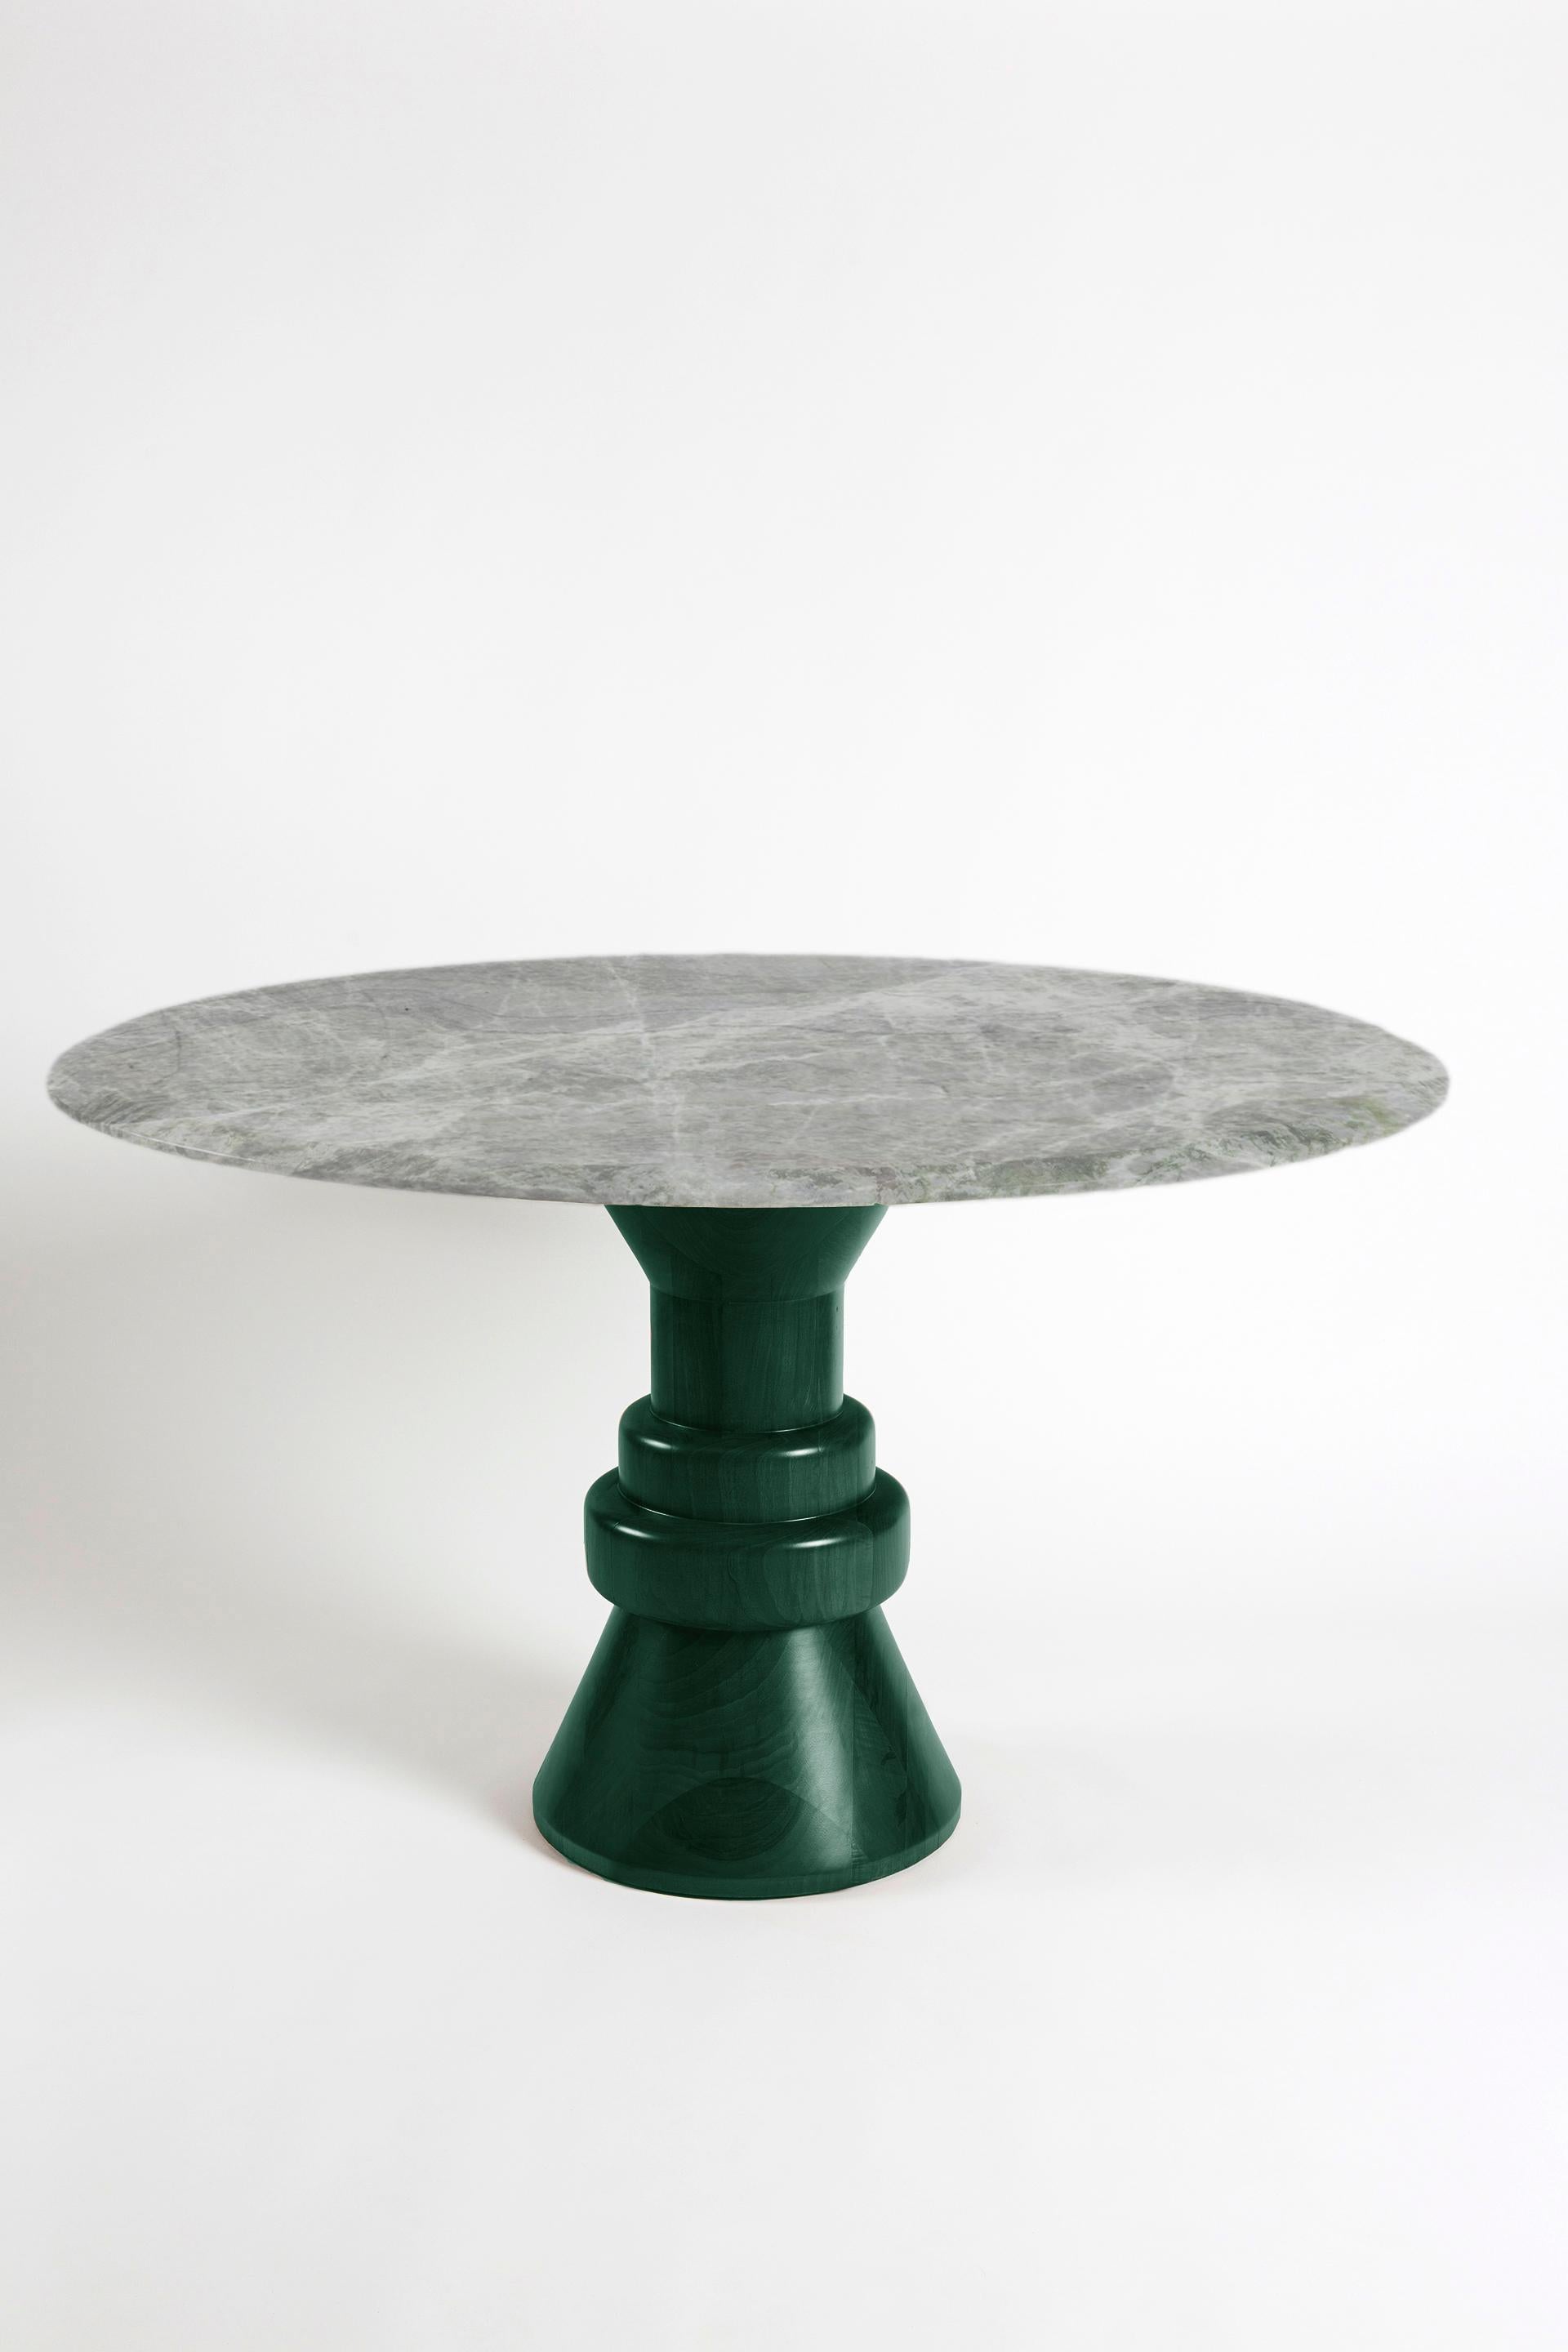 21st Century Pink Marble Round Dining Table with Sculptural Green Wooden Base For Sale 3